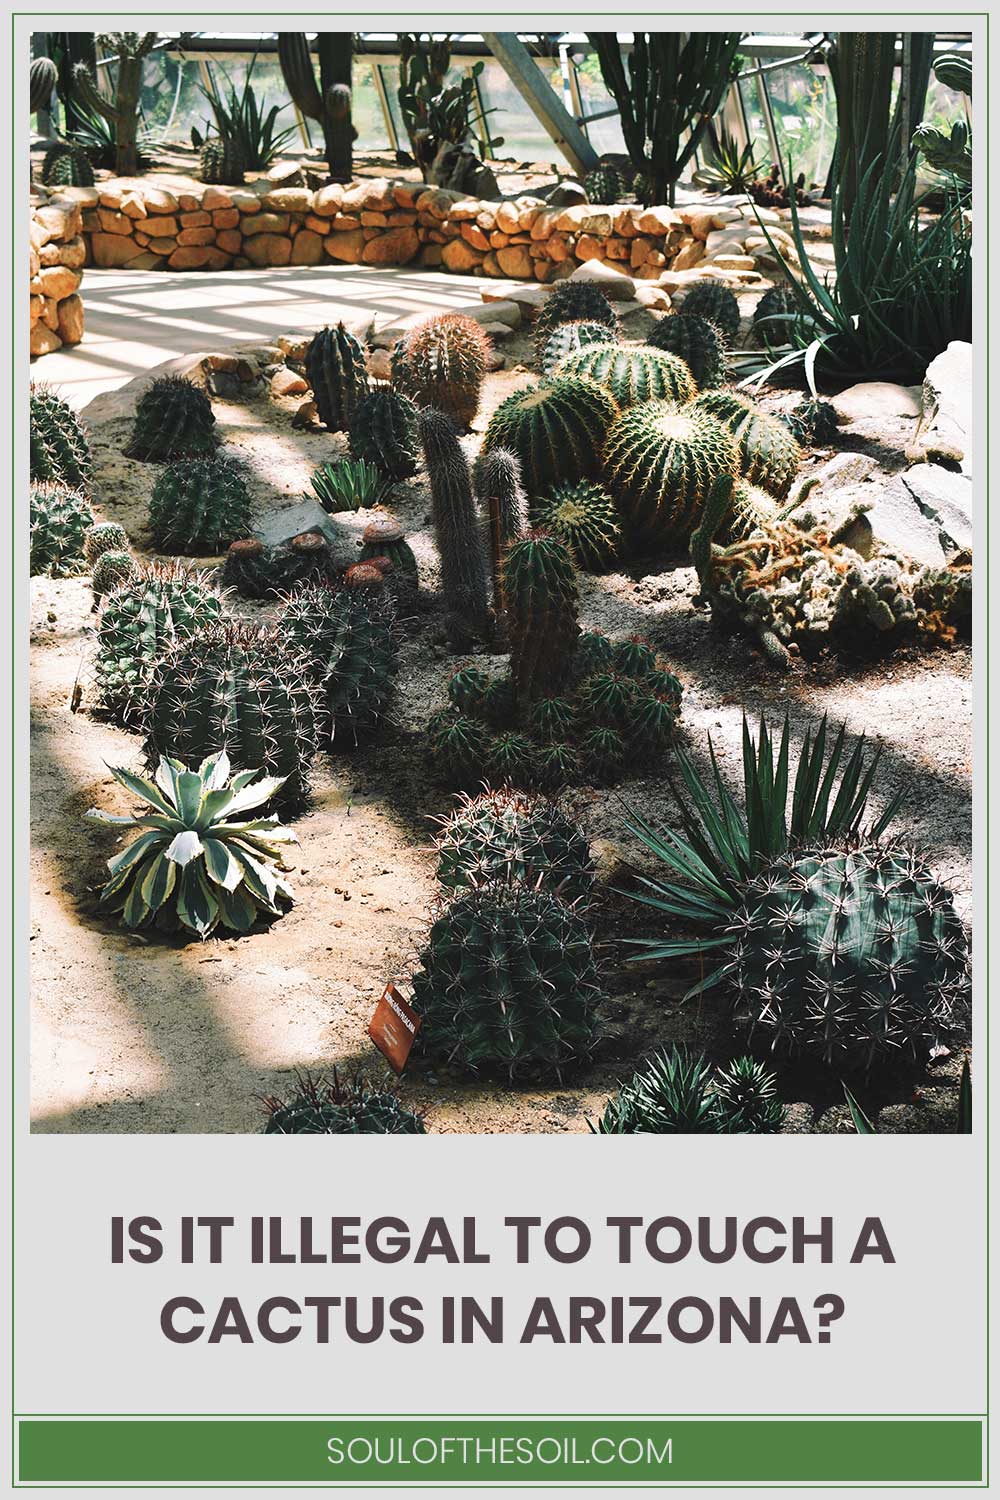 Is it illegal to touch a cactus in Arizona?